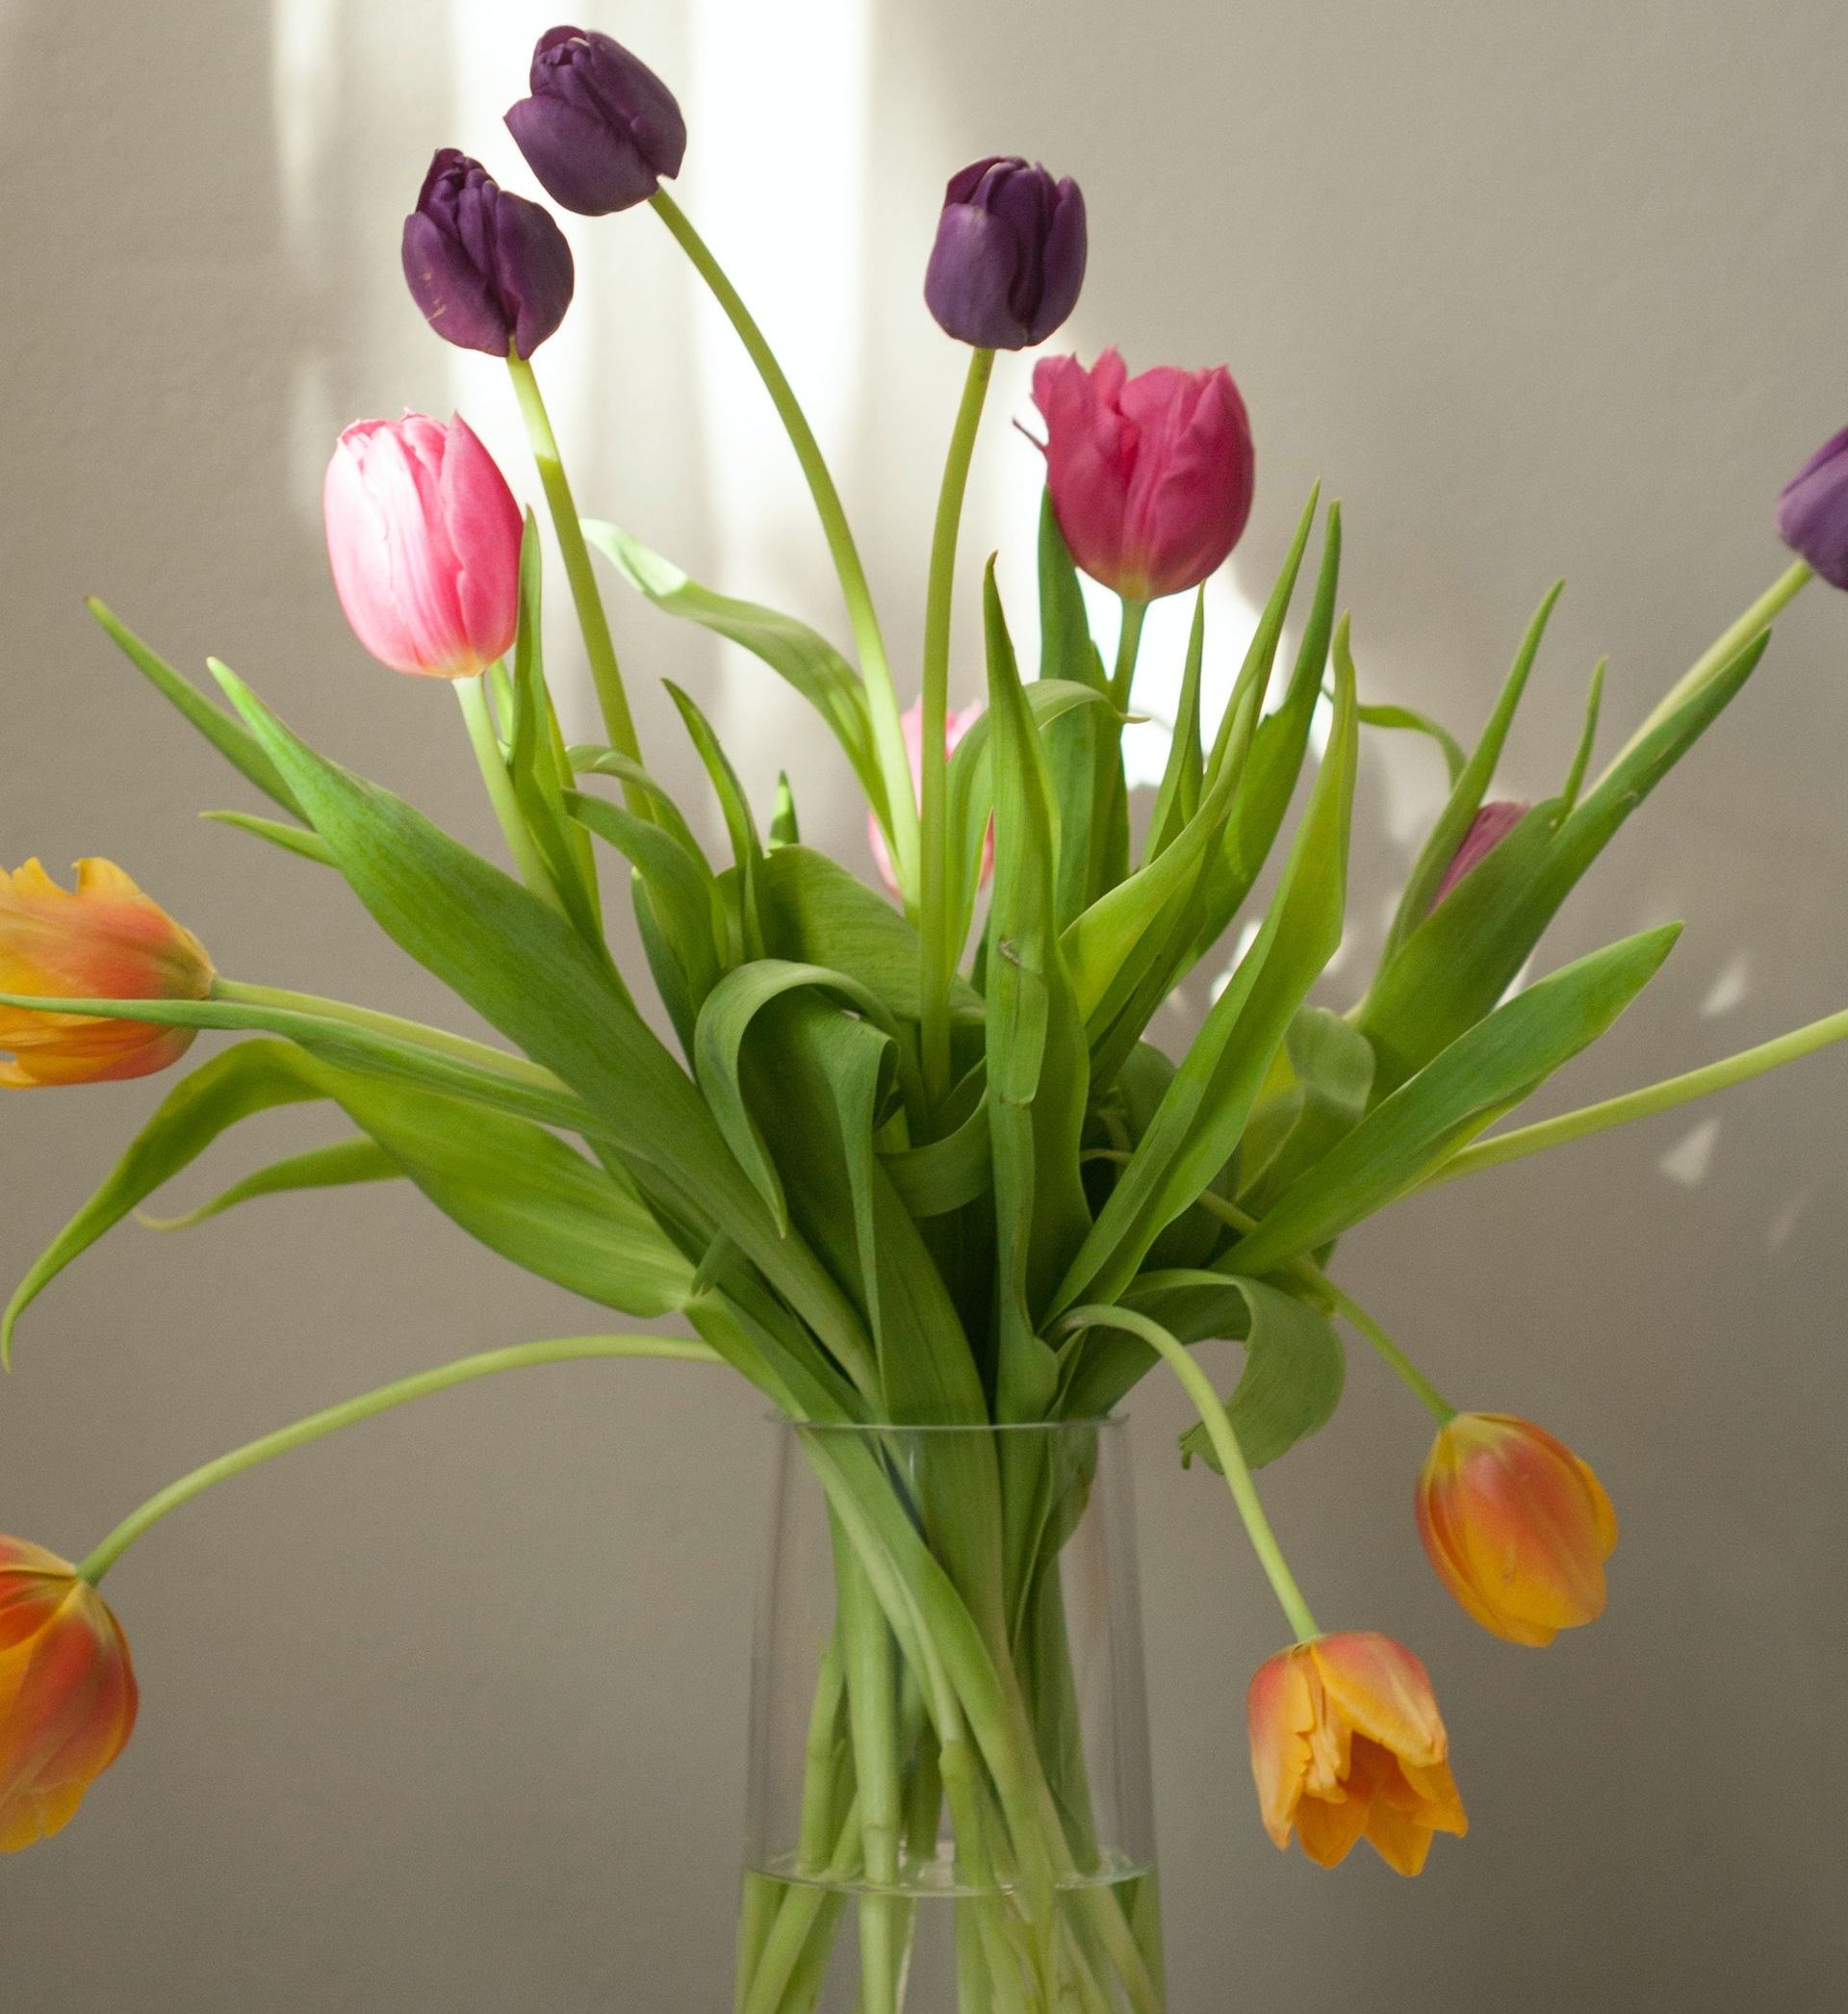 Bouquet of orange, pink, and purple tulips